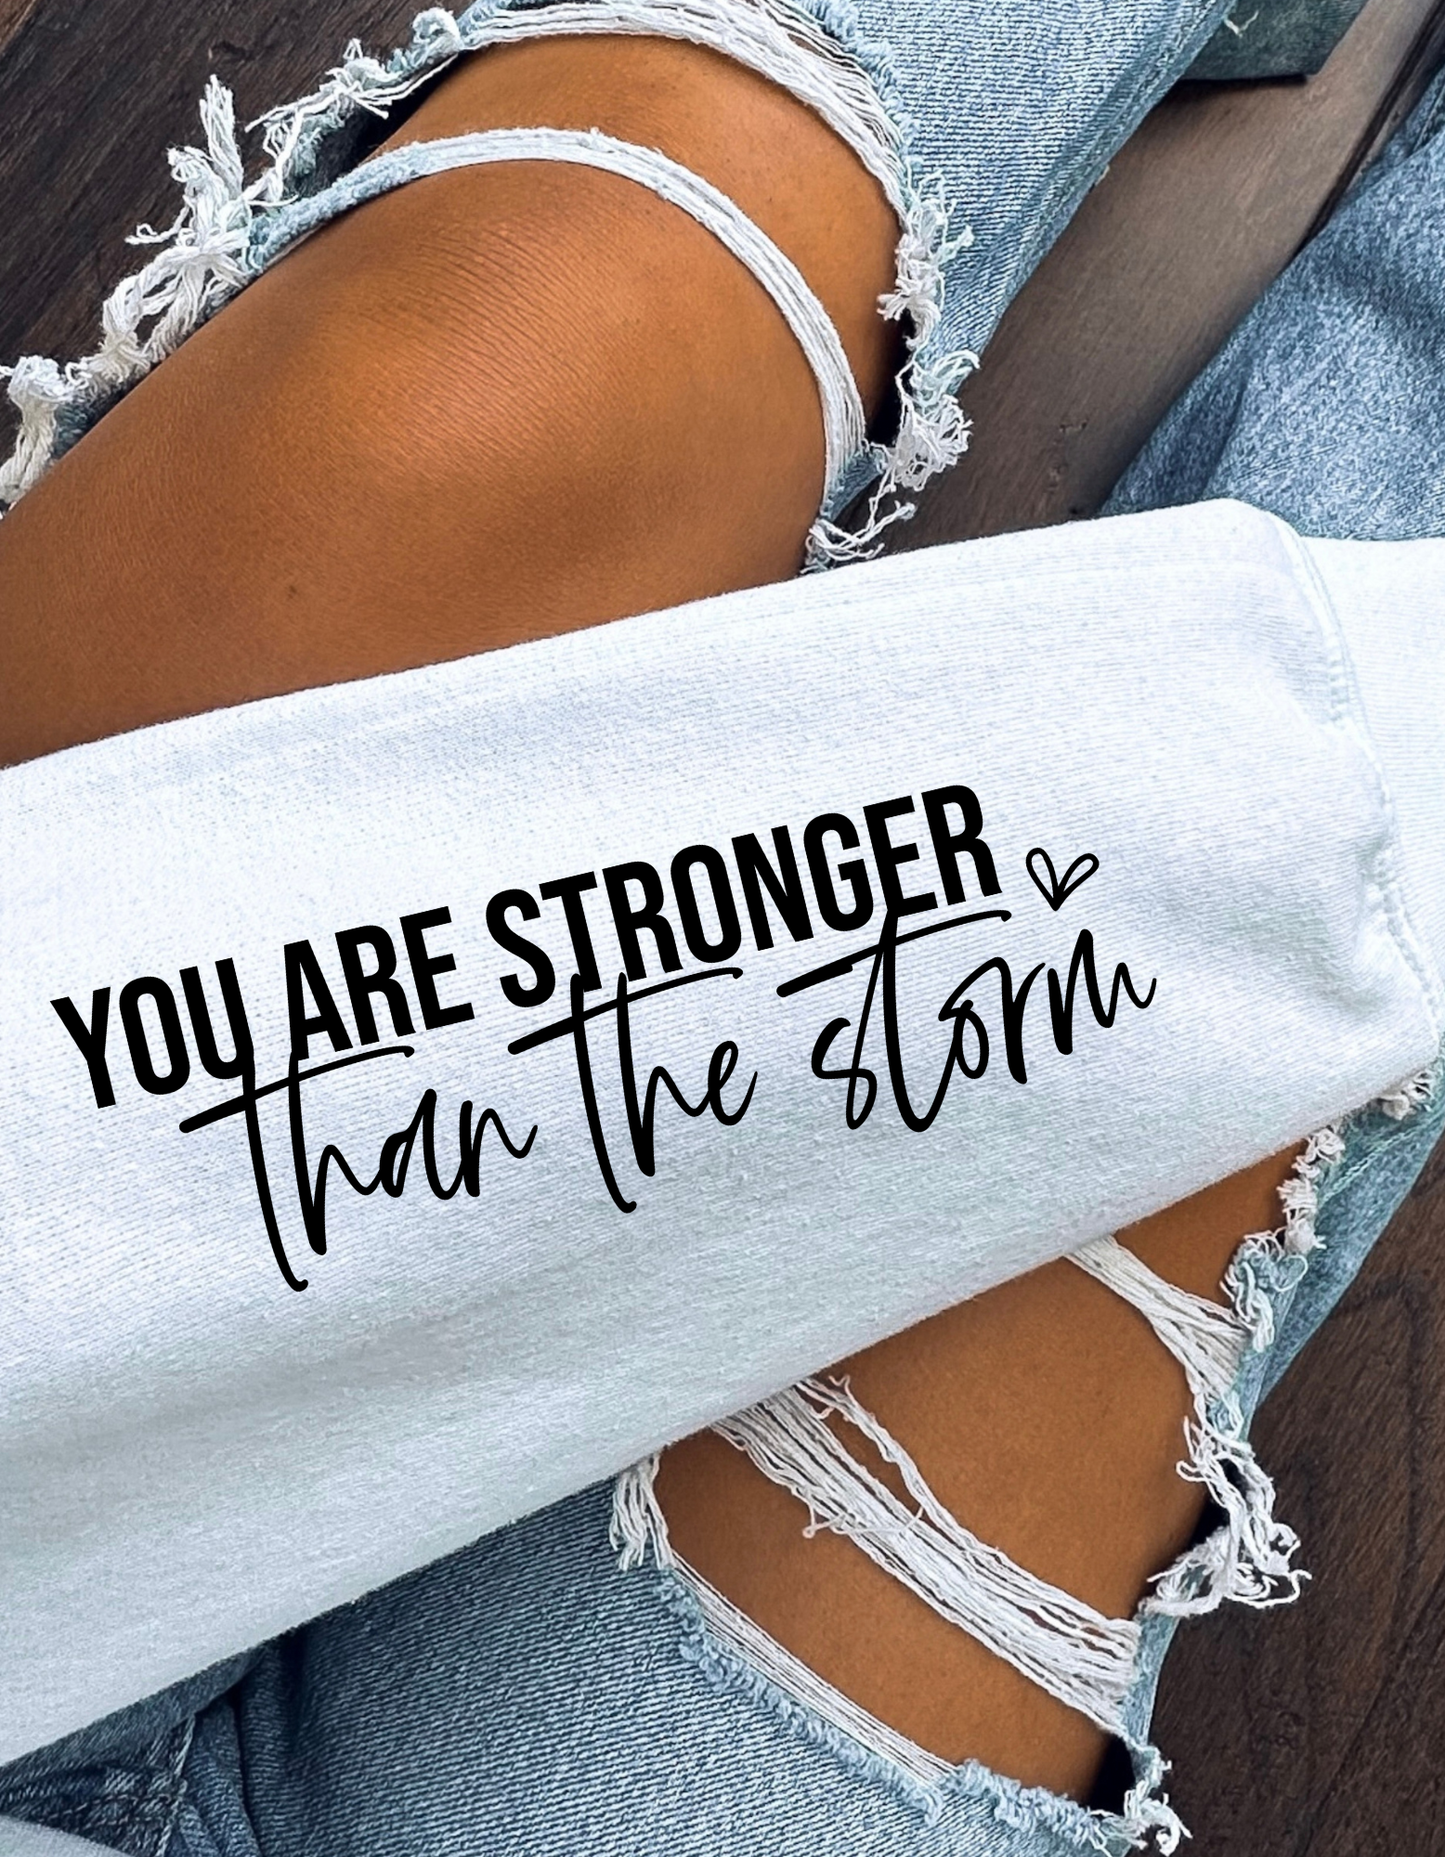 MAMA - You are stronger than the strom.